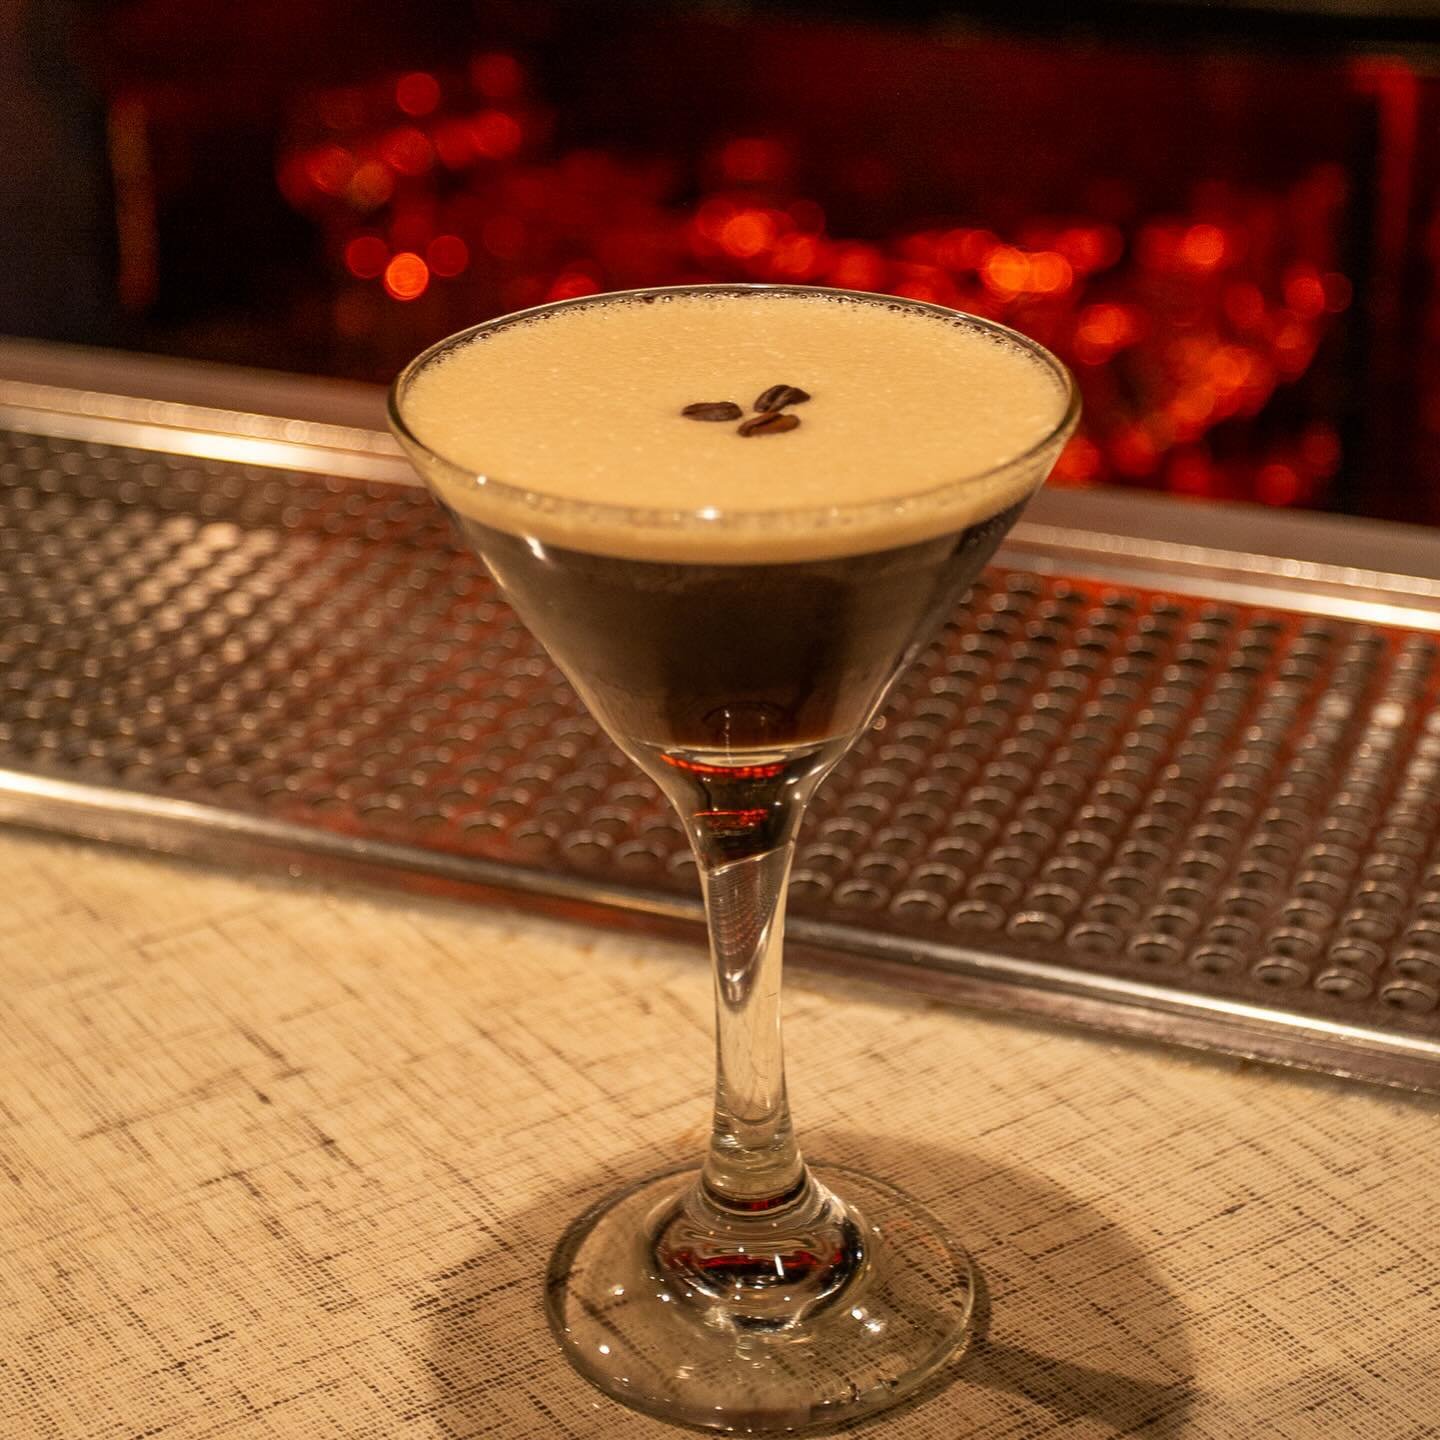 Hump day probably means you&rsquo;re in dire need of a good happy hour. Good thing you can stop by today from 5-7pm for Waffletini Happy Hour. 

Grab any of our martinis and get a complimentary side of waffle fries to go with it.

We&rsquo;ll see you